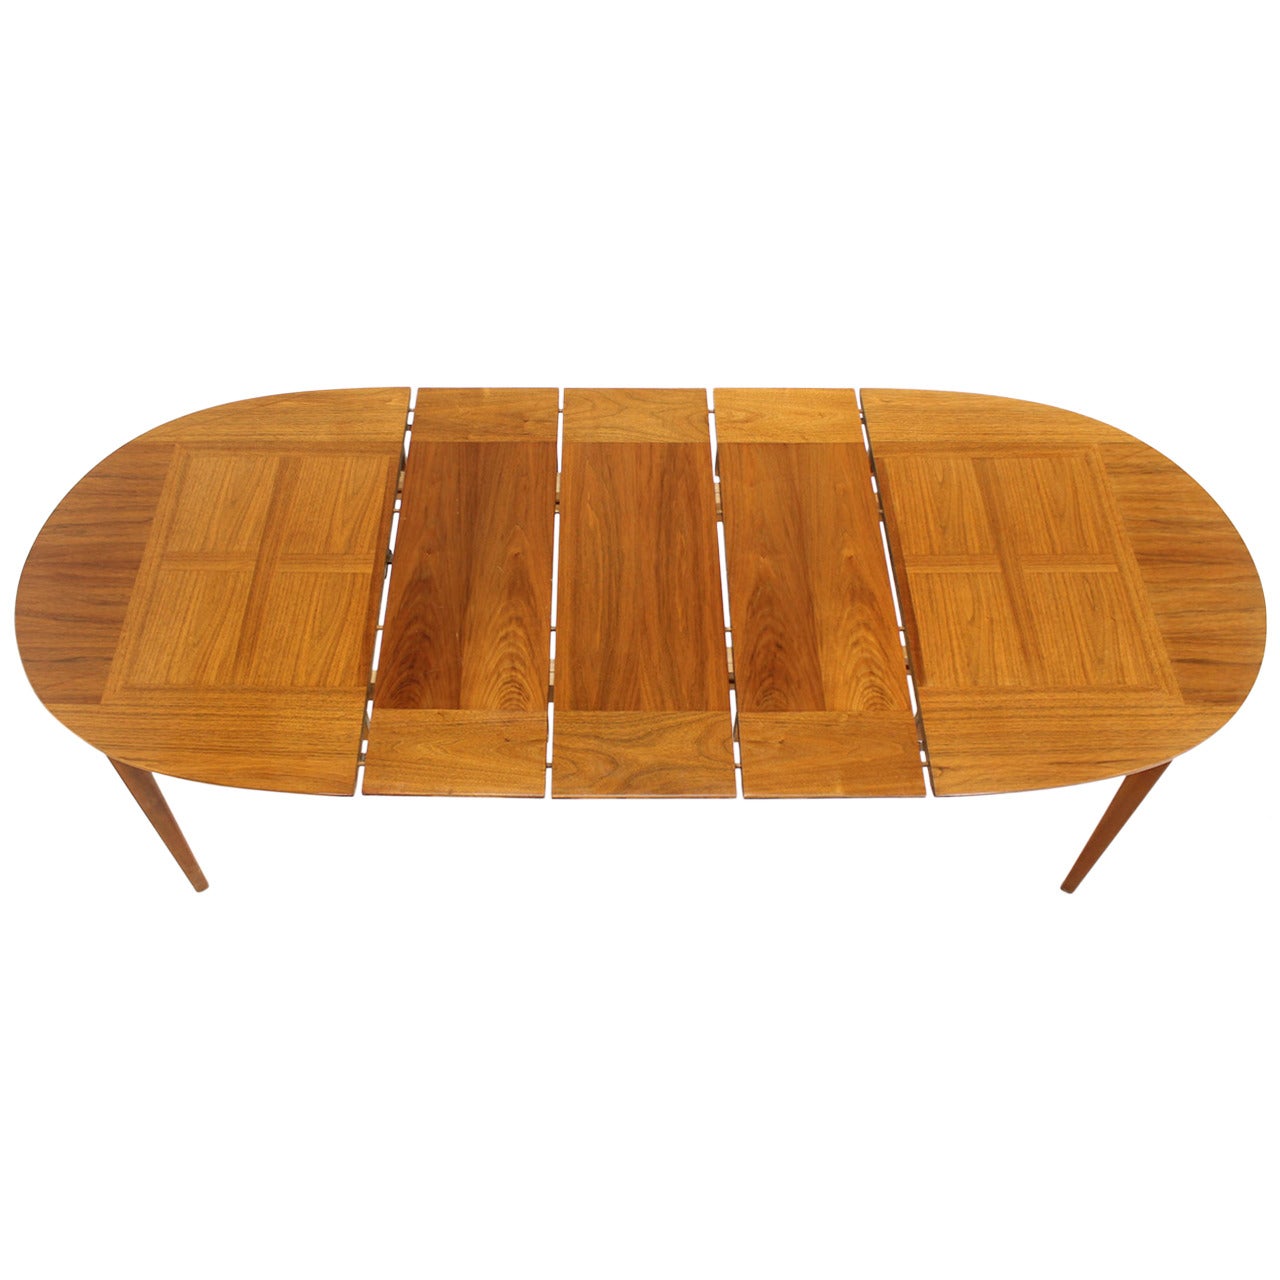 Mid-Century Modern Walnut Oval Dining Table with Three Leaves